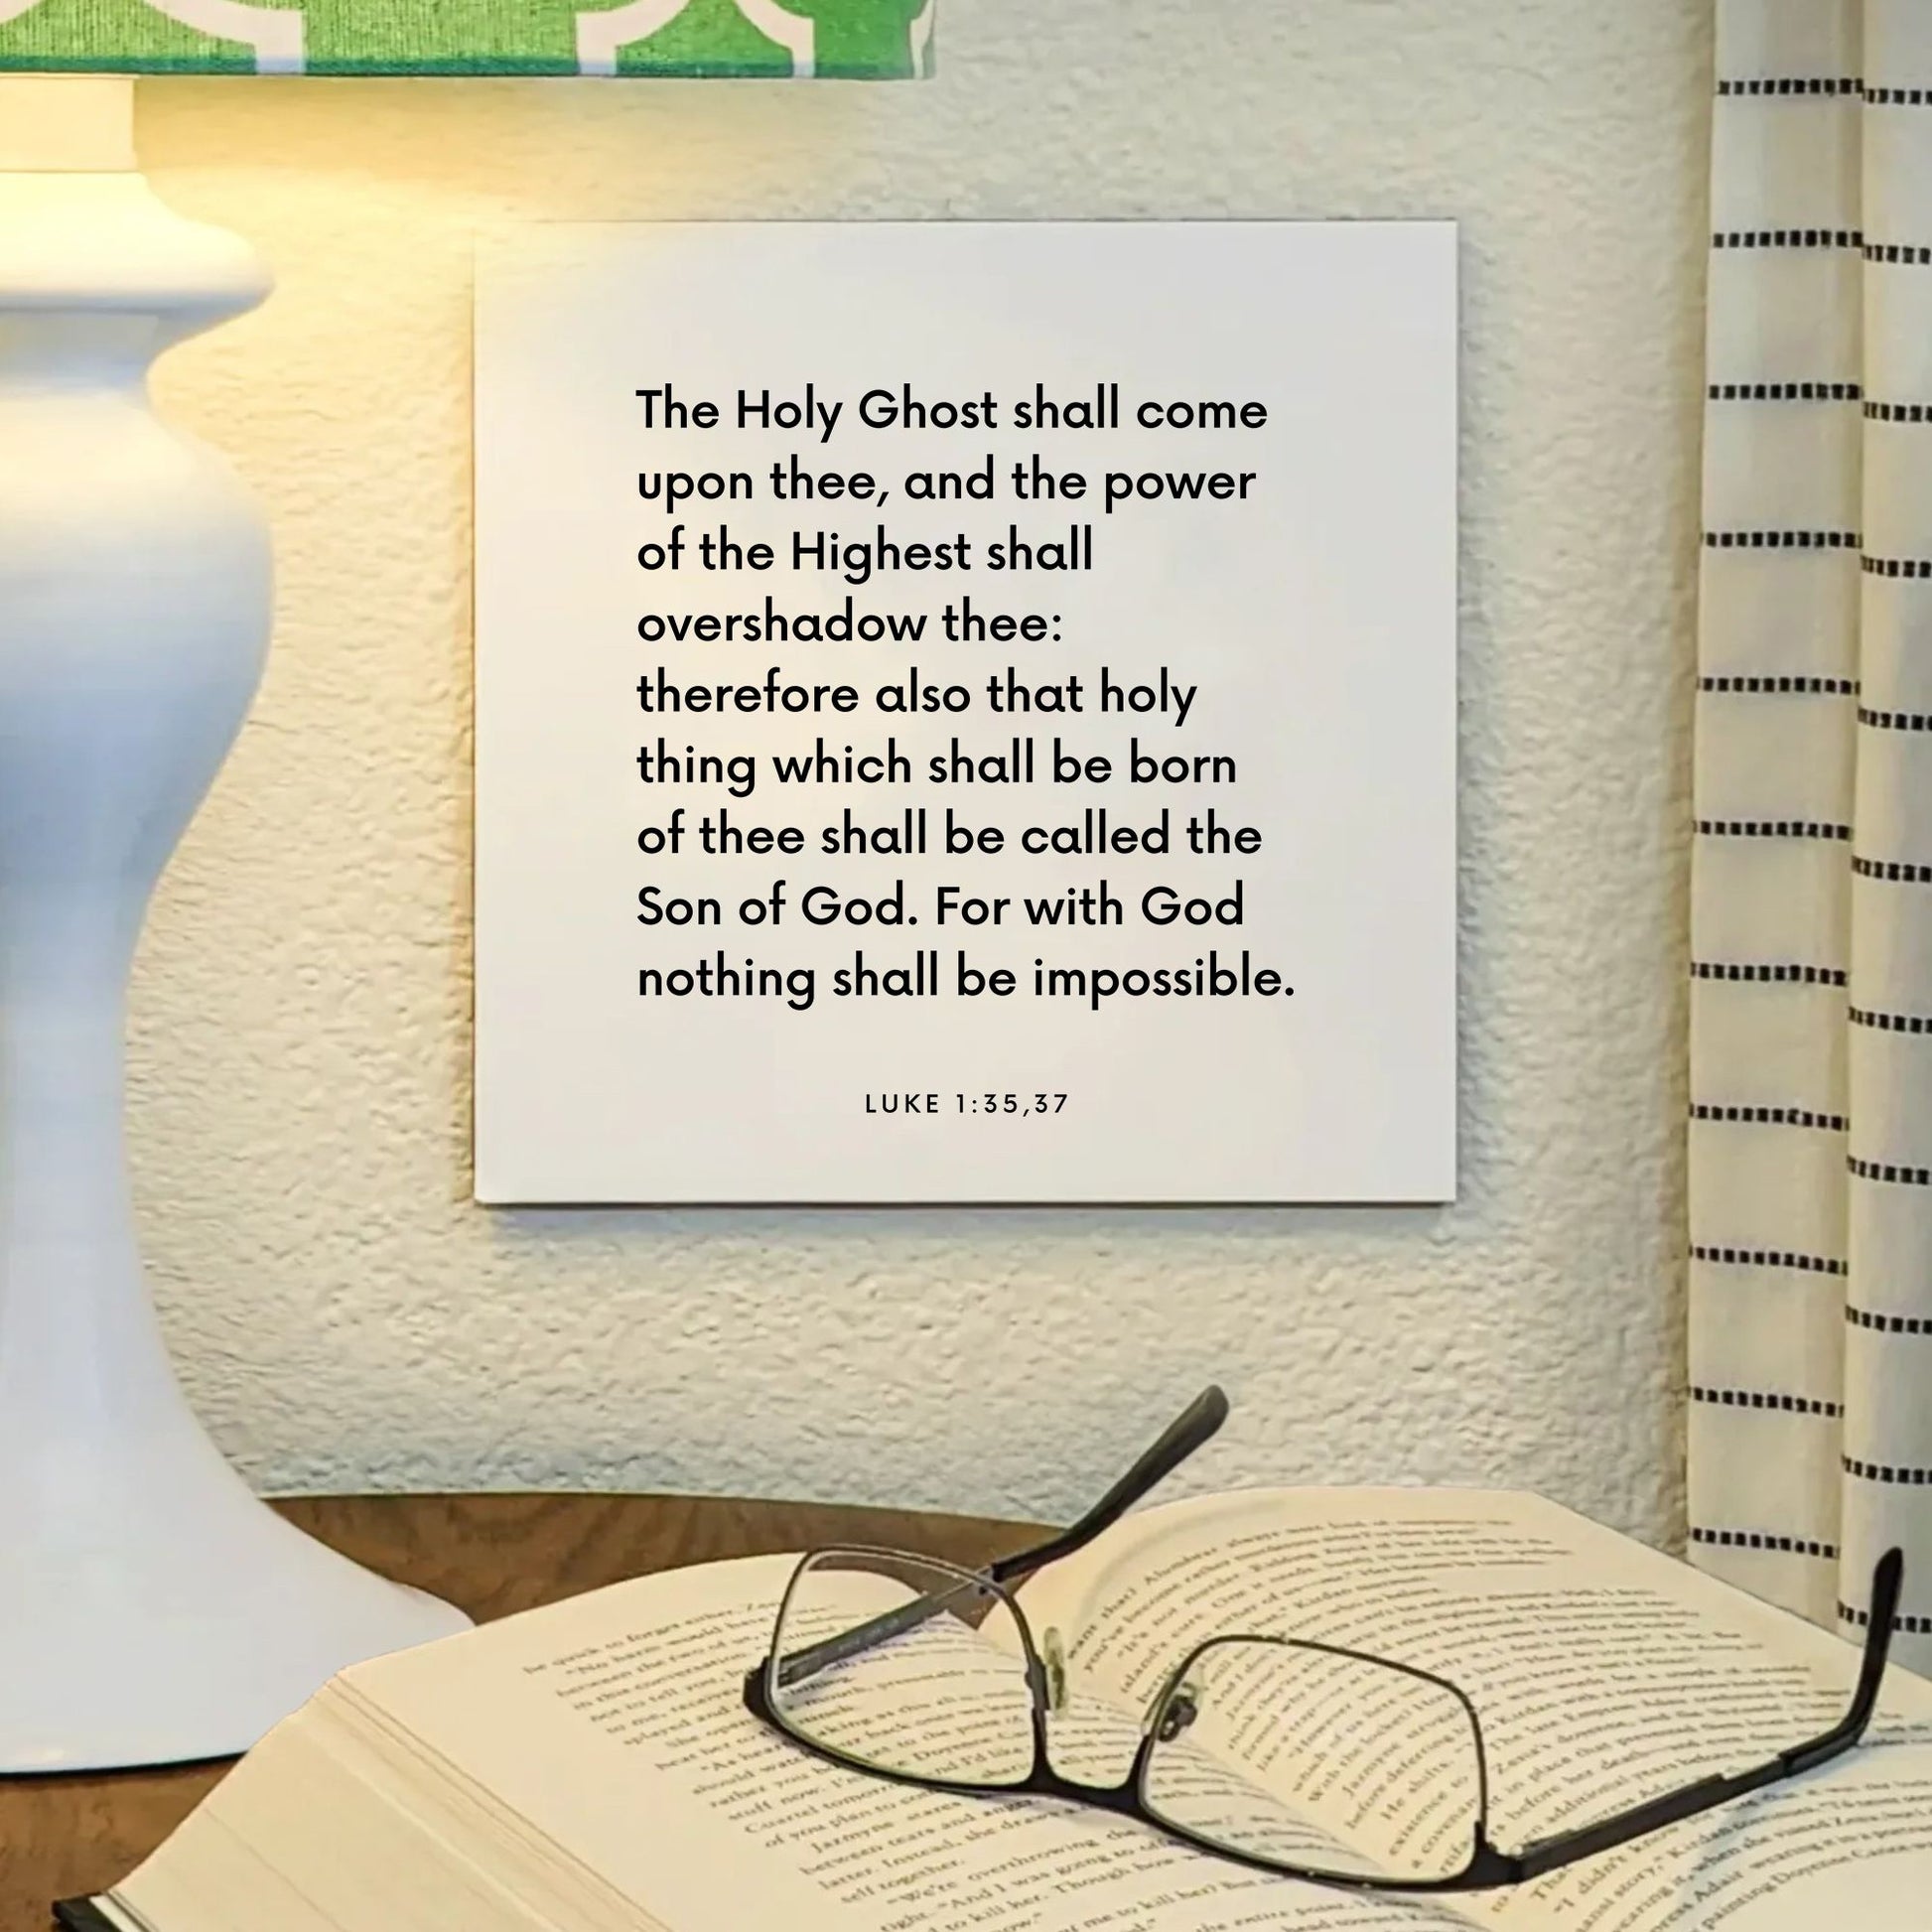 Lamp mouting of the scripture tile for Luke 1:35,37 - "The Holy Ghost shall come upon thee"